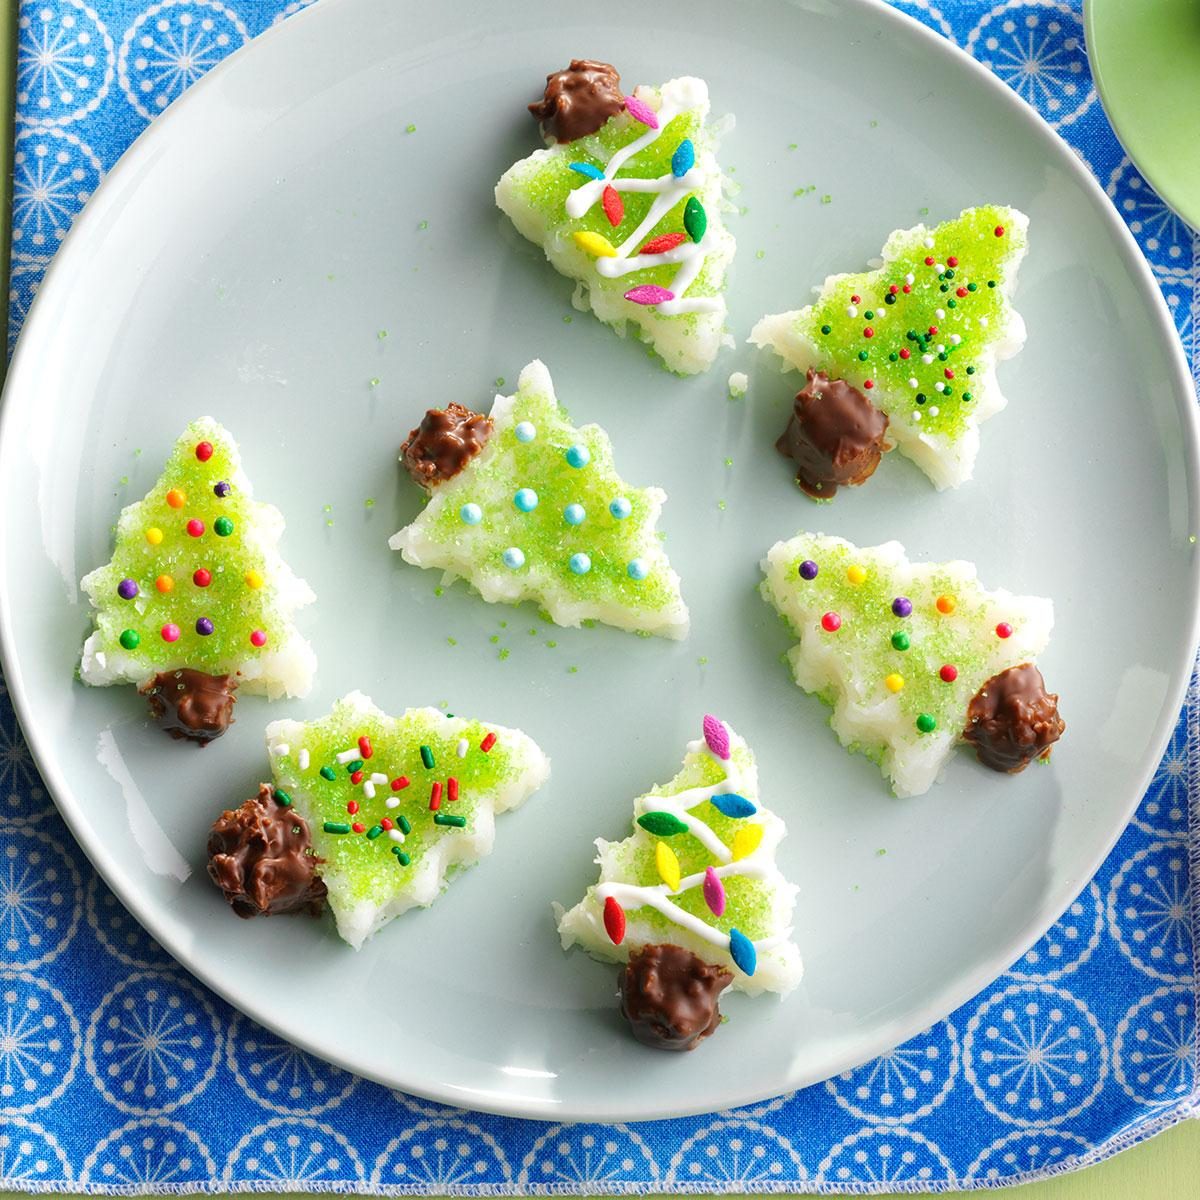 Candy Recipes - Beginner, Christmas & More | Taste of Home